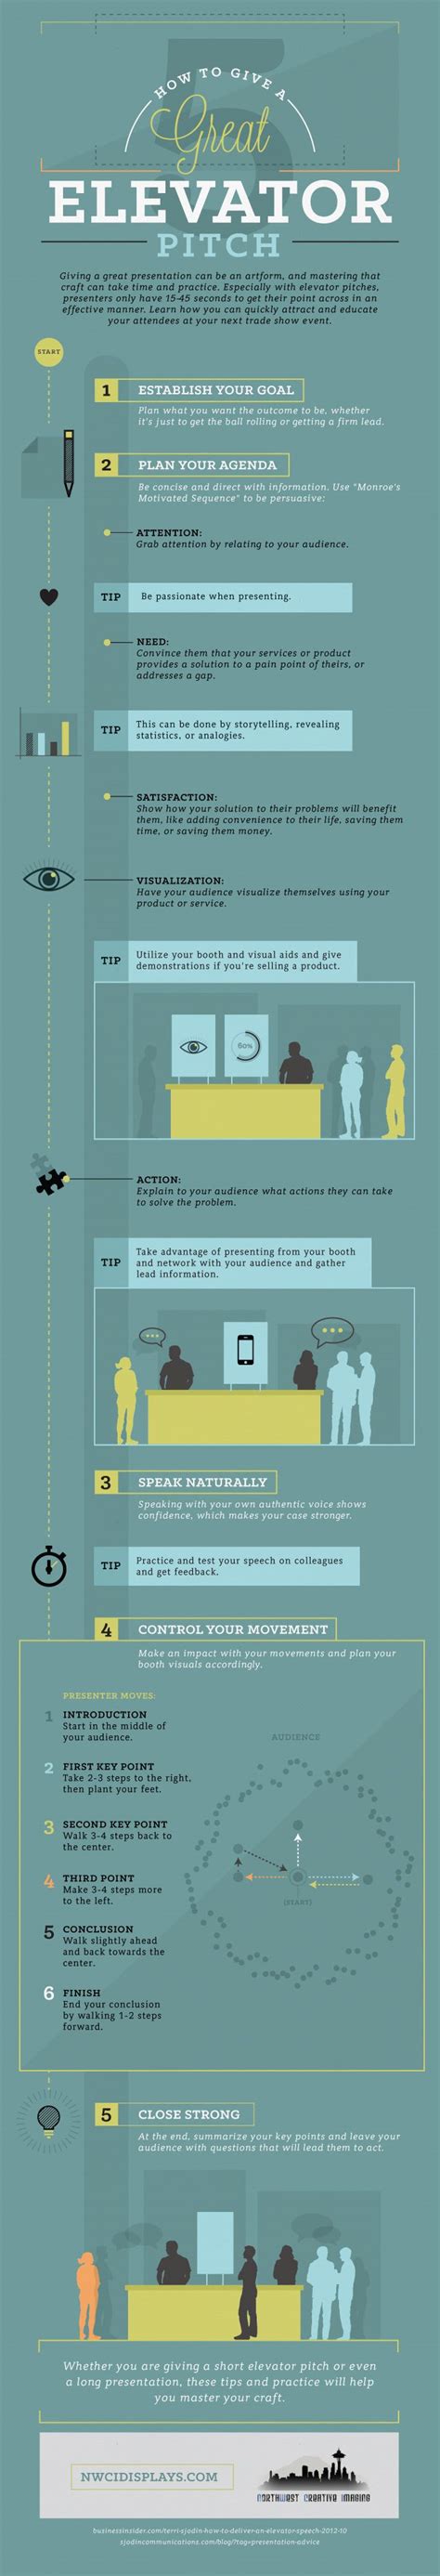 How To Give A Great Elevator Pitch Infographic Infographic